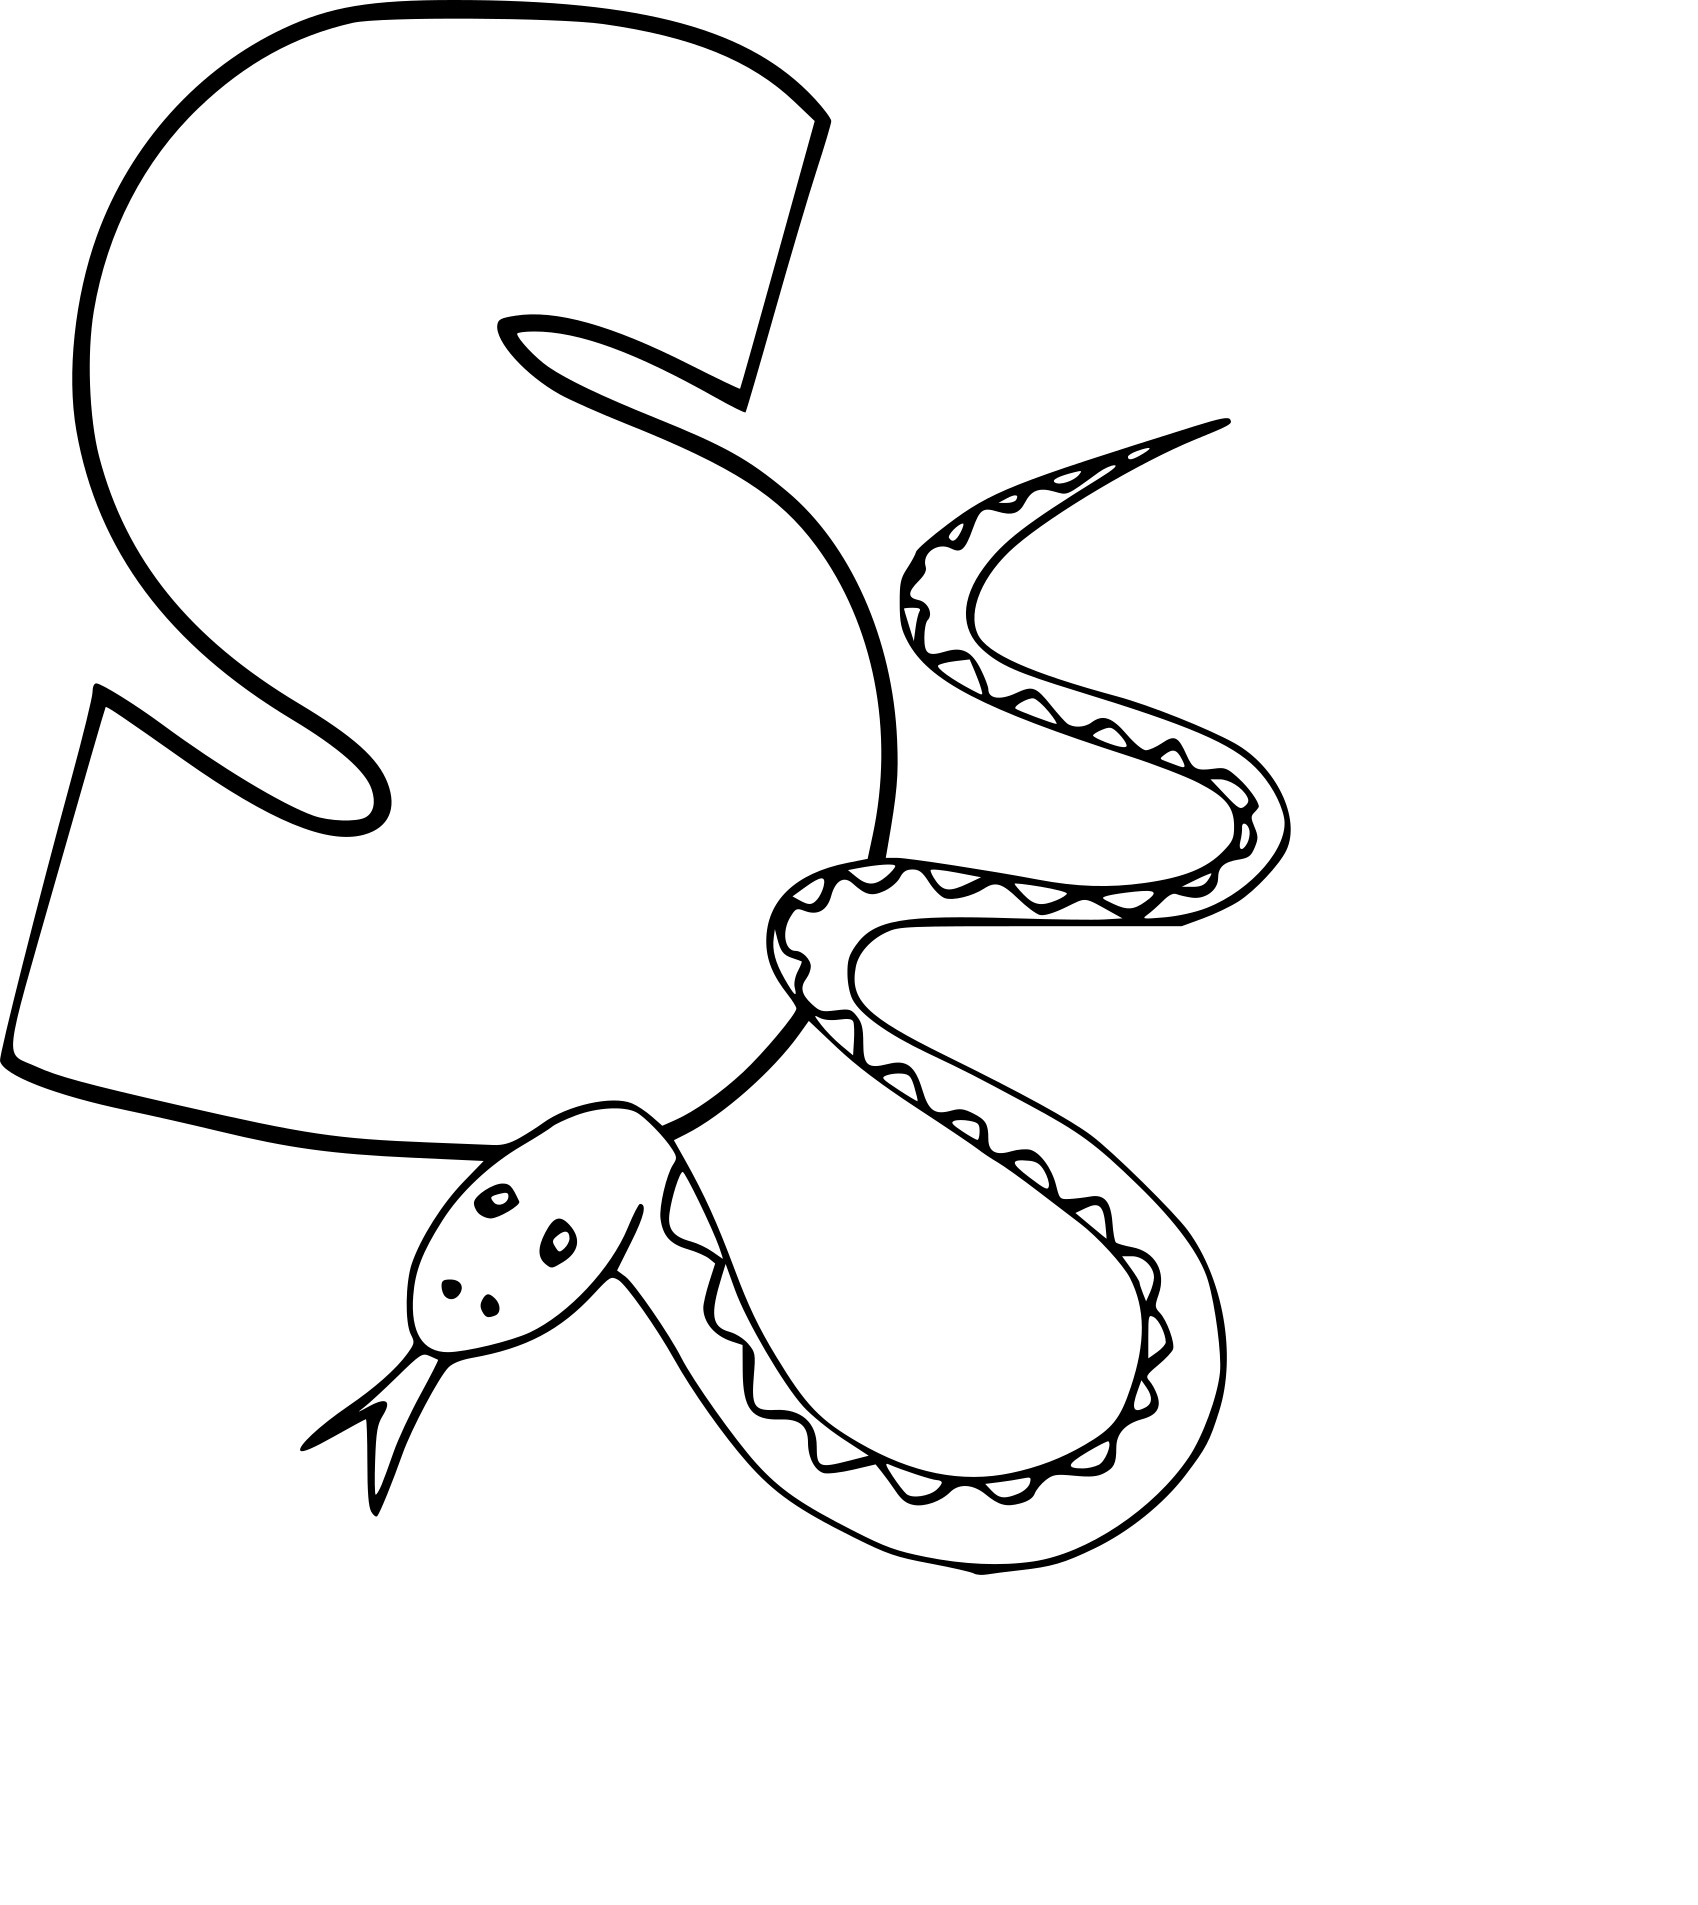 S For Snake coloring page